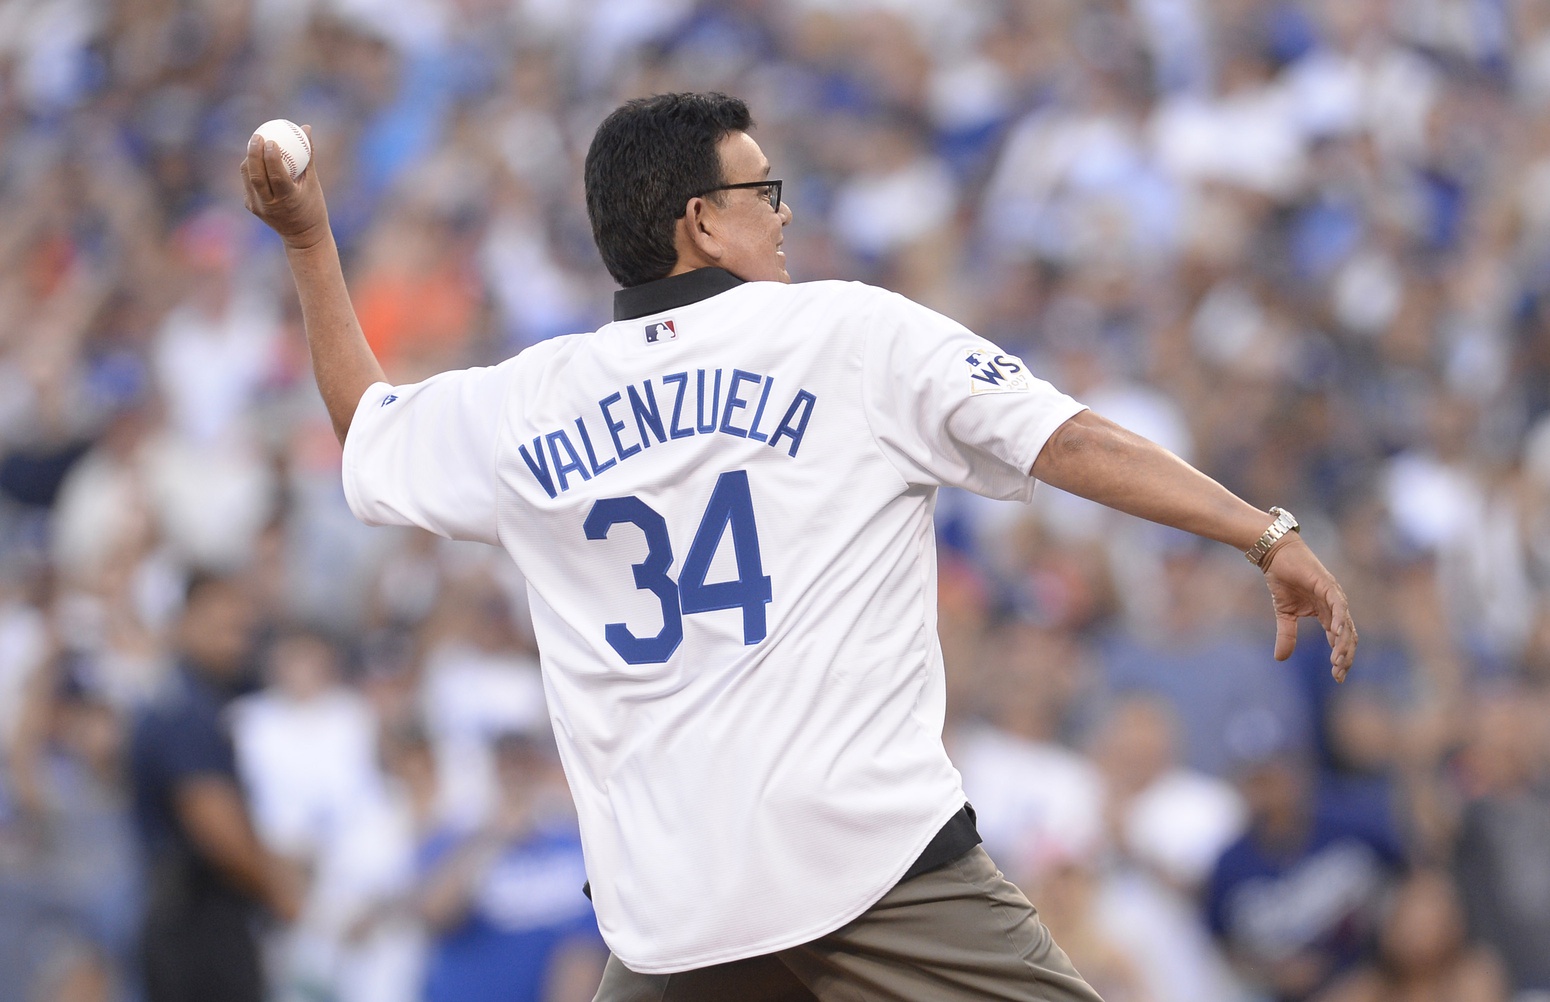 Oct 25, 2017; Los Angeles, CA, USA; Los Angeles Dodgers former pitcher Fernando Valenzuela throws out the ceremonial first pitch before game two of the 2017 World Series against the Houston Astros at Dodger Stadium. Mandatory Credit: Gary A. Vasquez-USA TODAY Sports